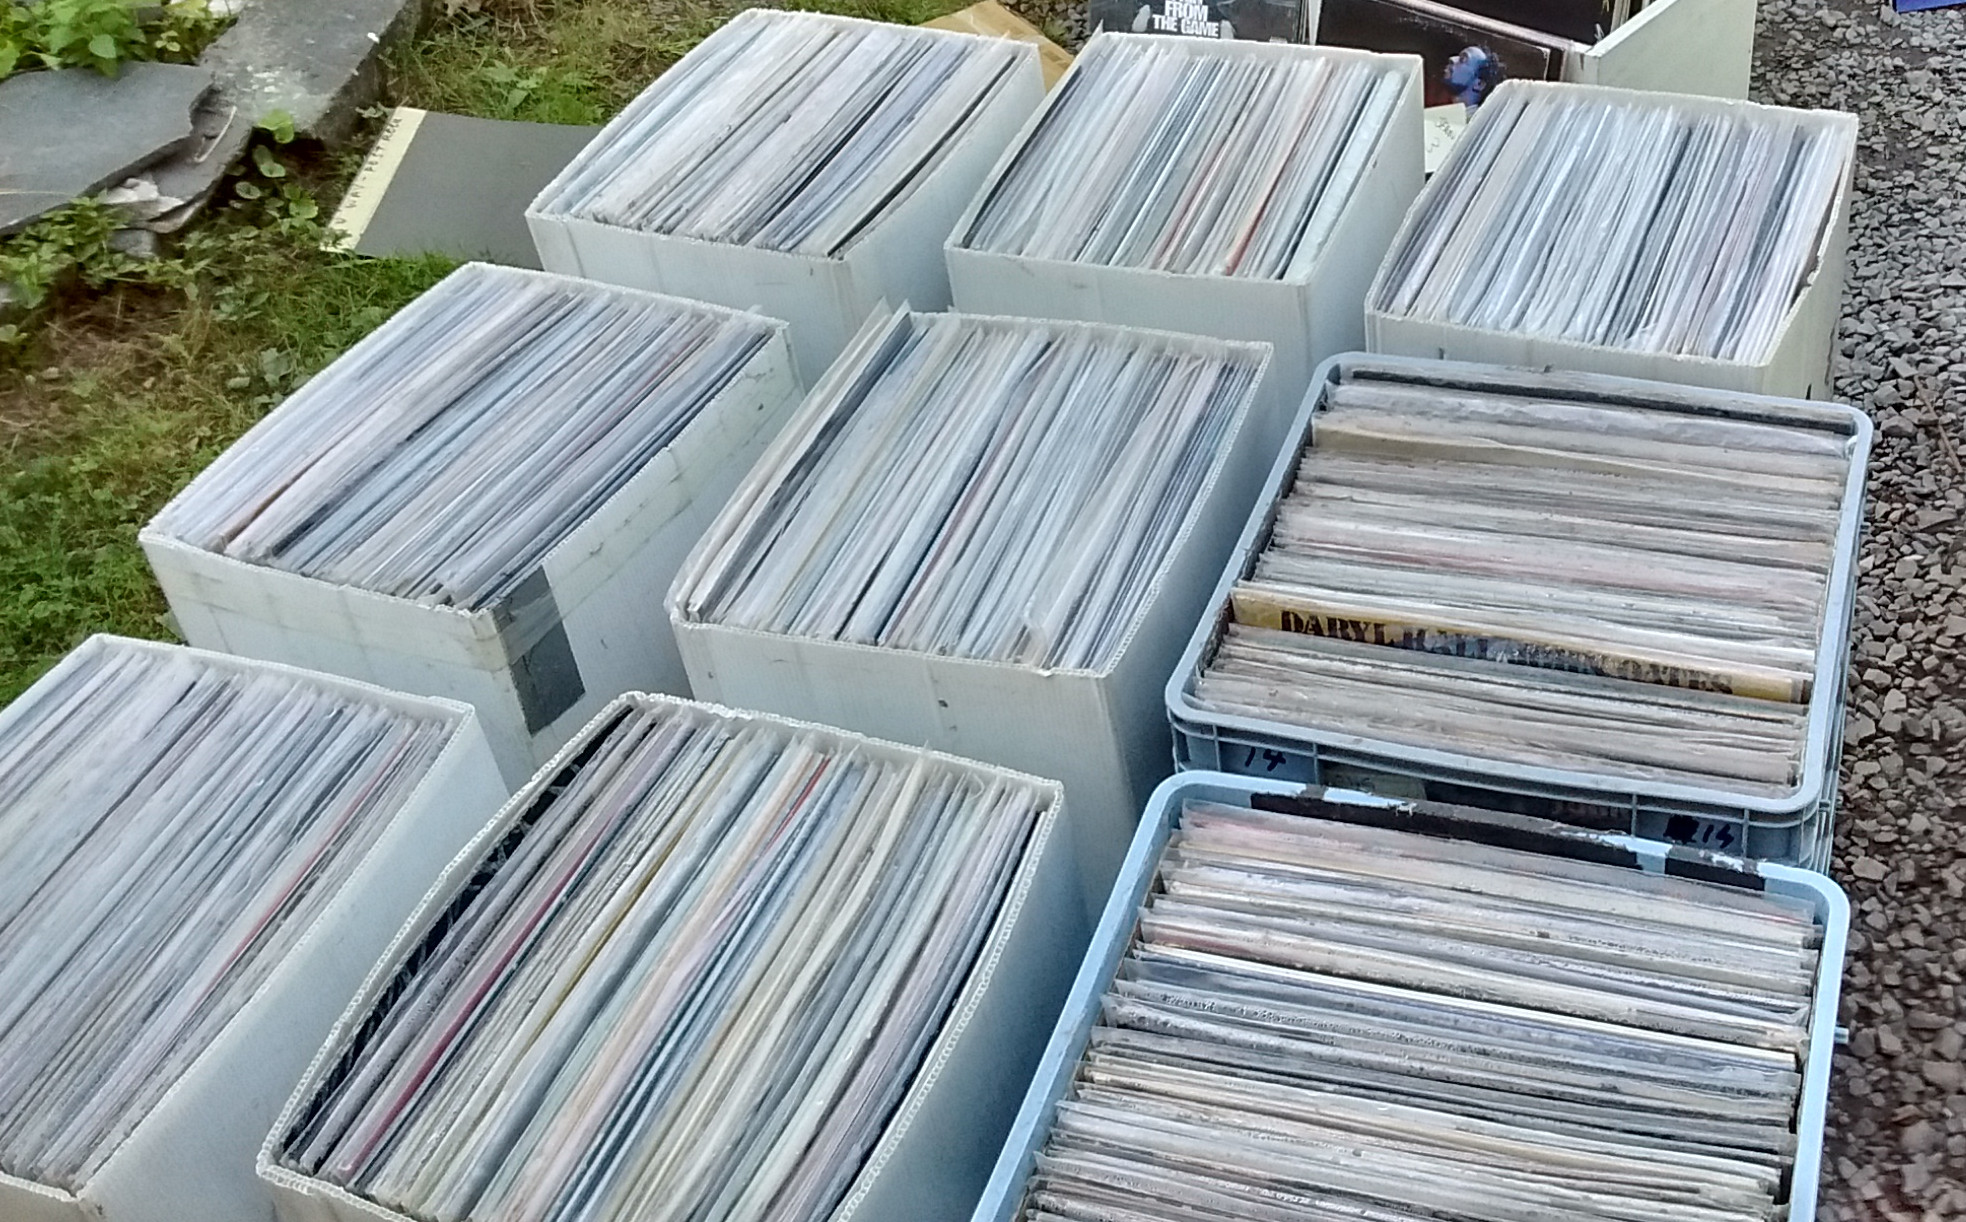 99 cents – 13 boxes of records -1000+ items? –  eBay auction – local pickup